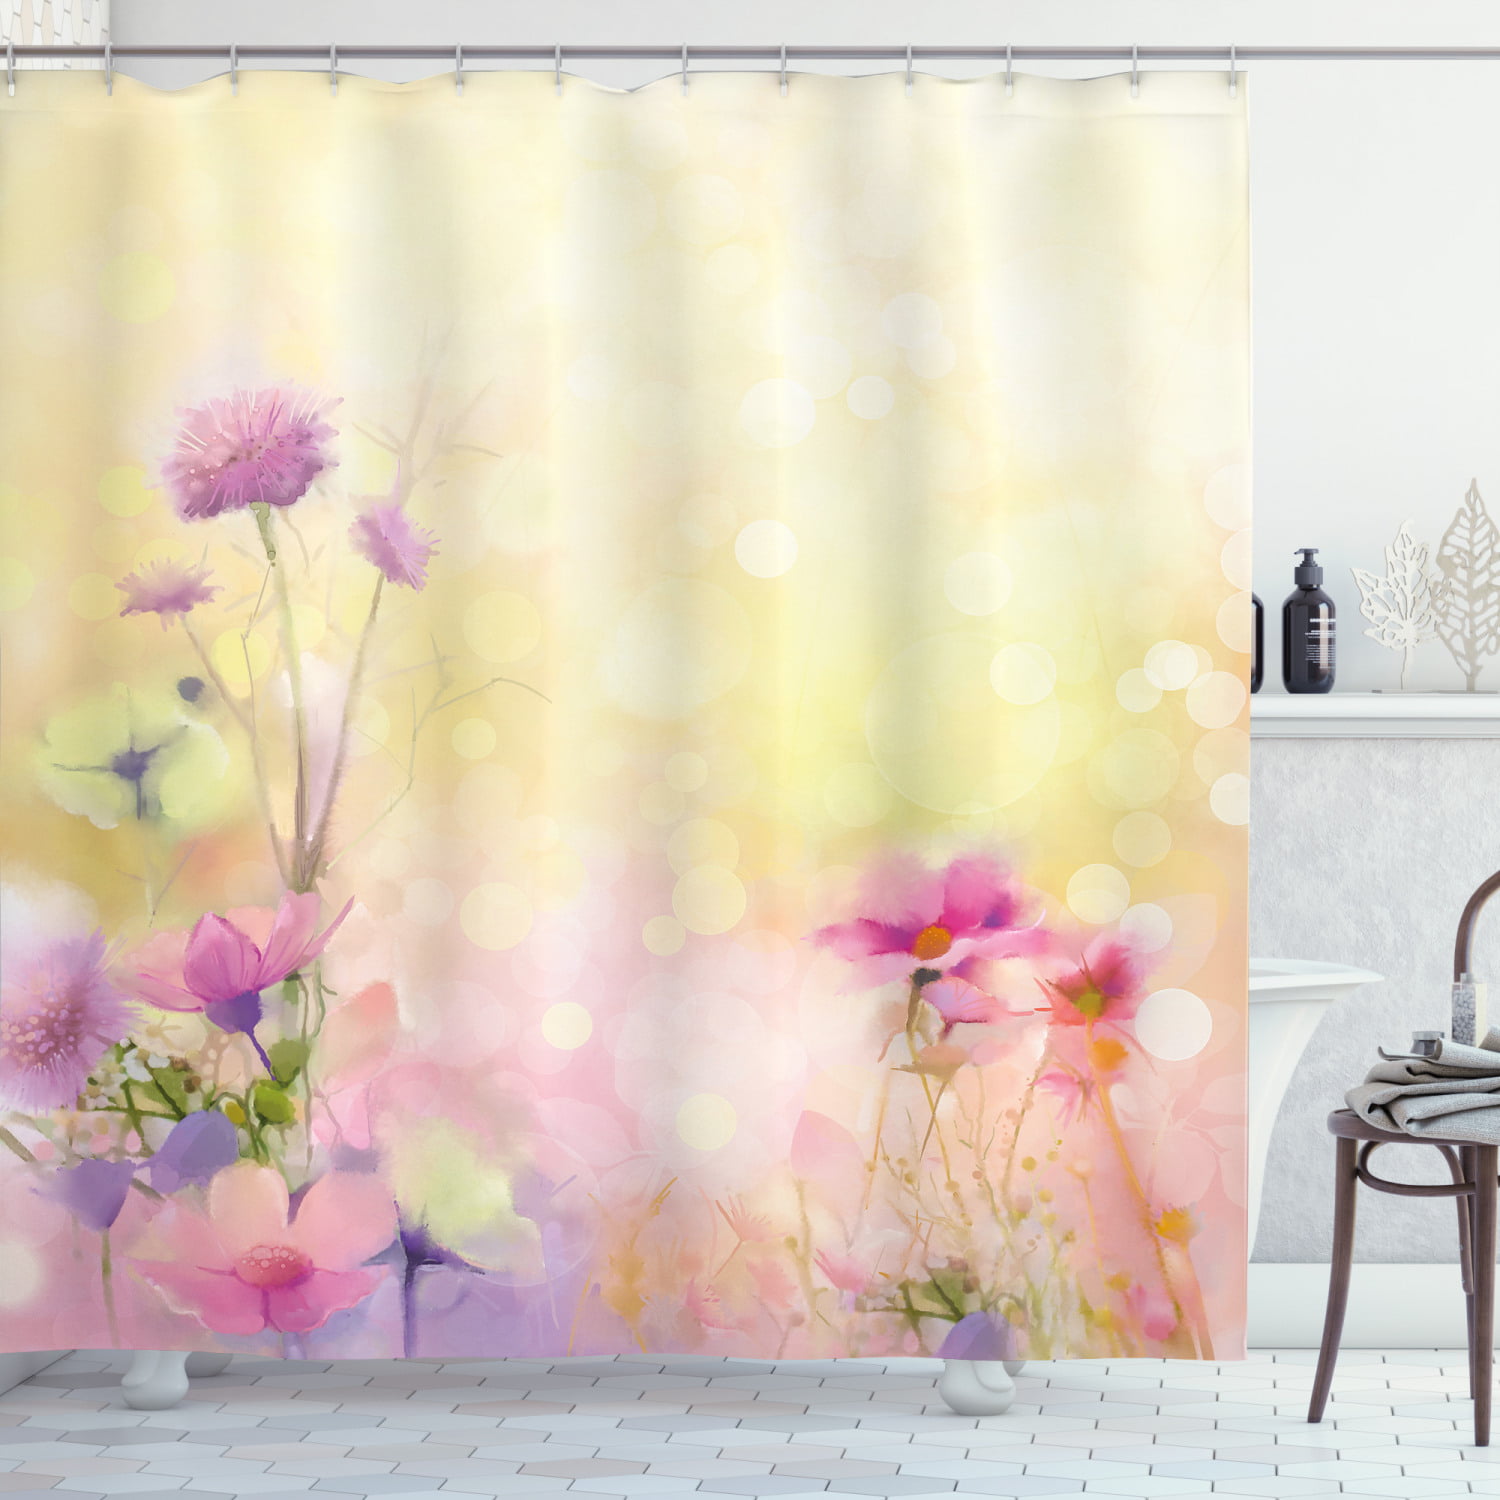 Colorful flowers Bathroom Shower Curtain Liner Polyester waterproof 12 hooks NEW 